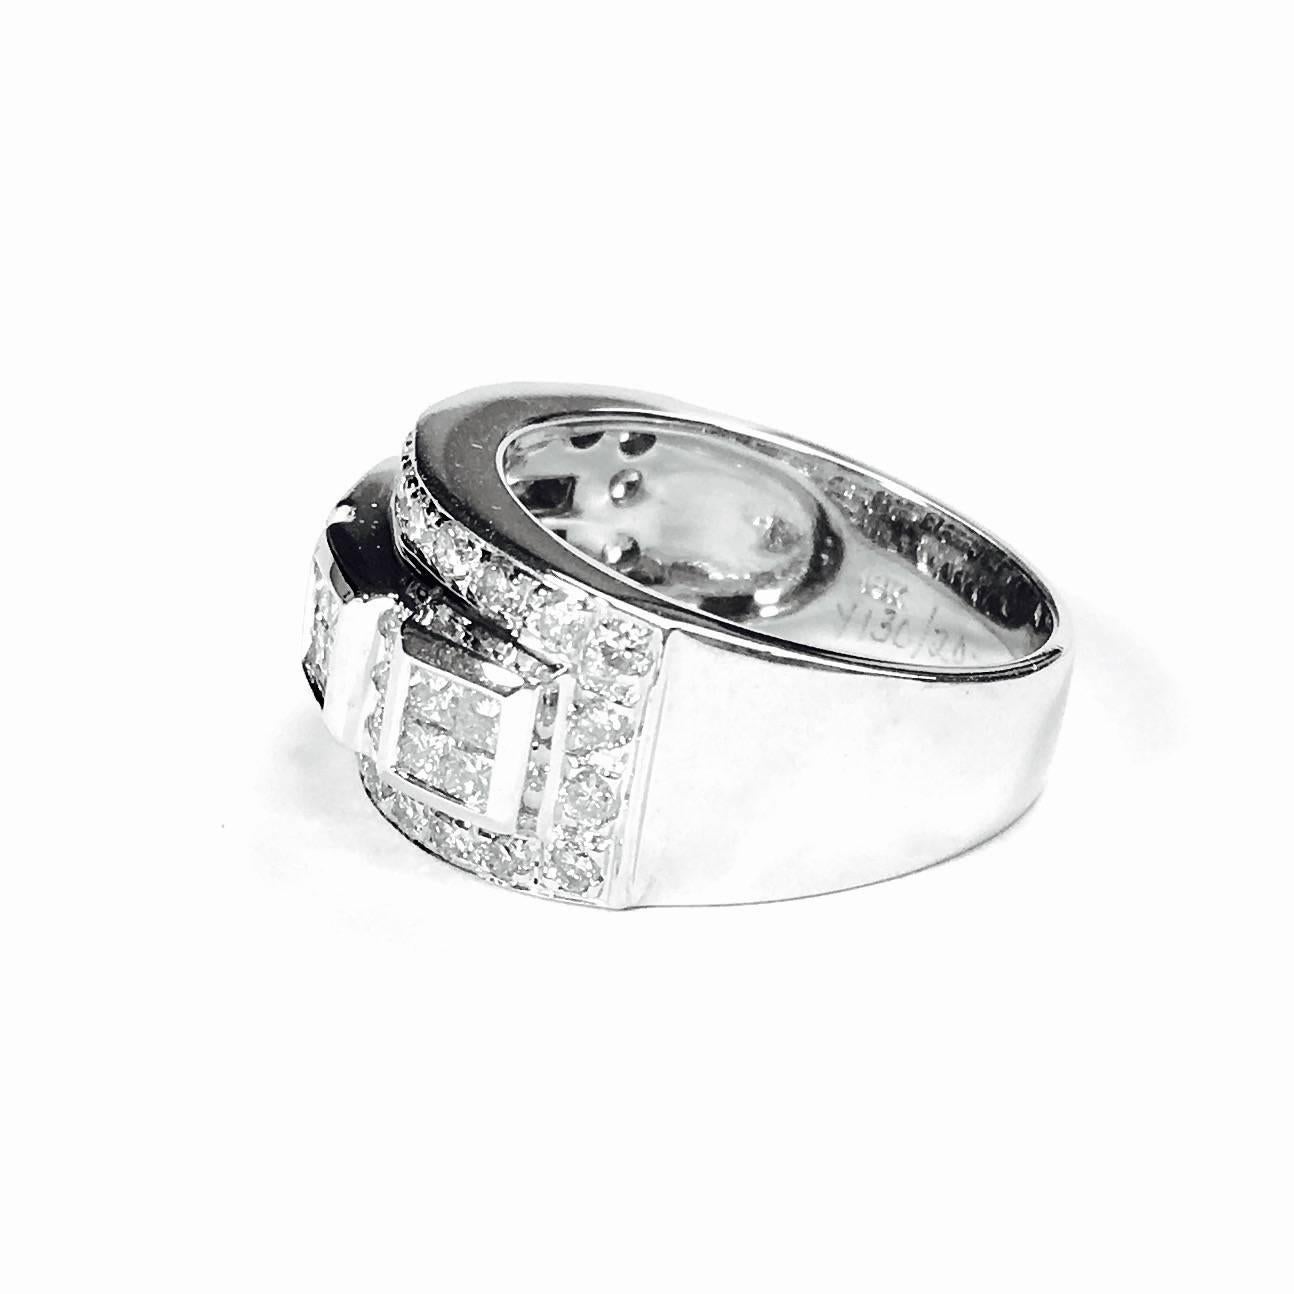 18K white gold band, measuring 10.5 mm on the front and 5 mm on the back, set with round brilliant and princess cut diamonds, approximate total weight: 1.00ct, Color: F-G Clarity: VS1-VS2
Size: 6.5
Weight: 10.3 grams